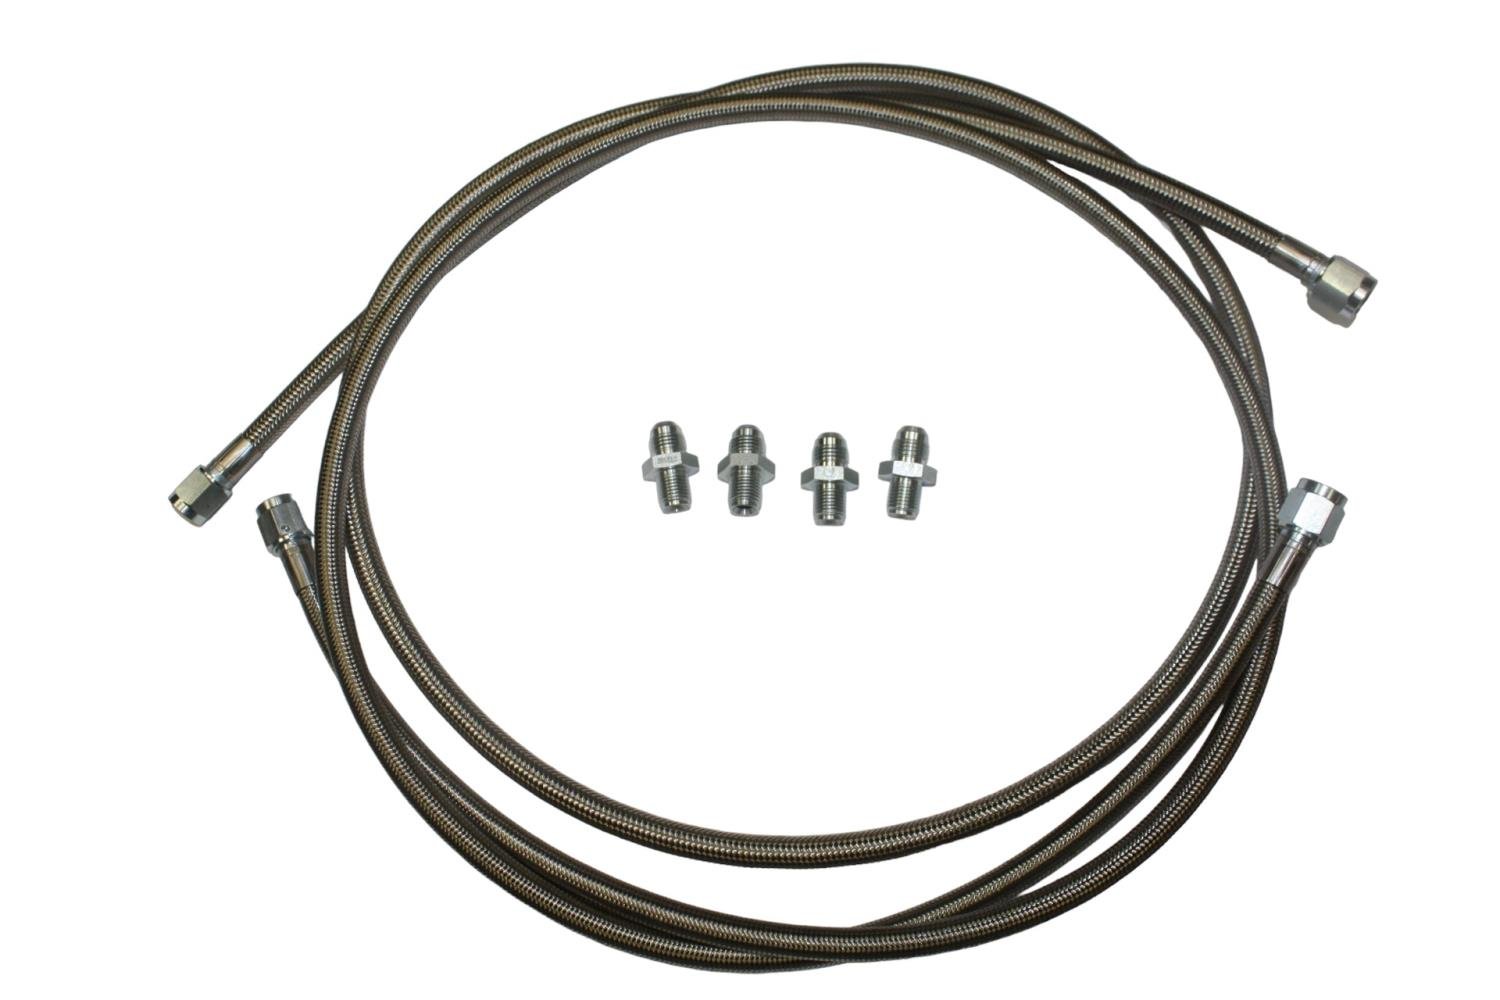 23-1501-60 Automatic Transmission Cooler Lines for TH350, TH400, 700R Transmissions [5 ft.]